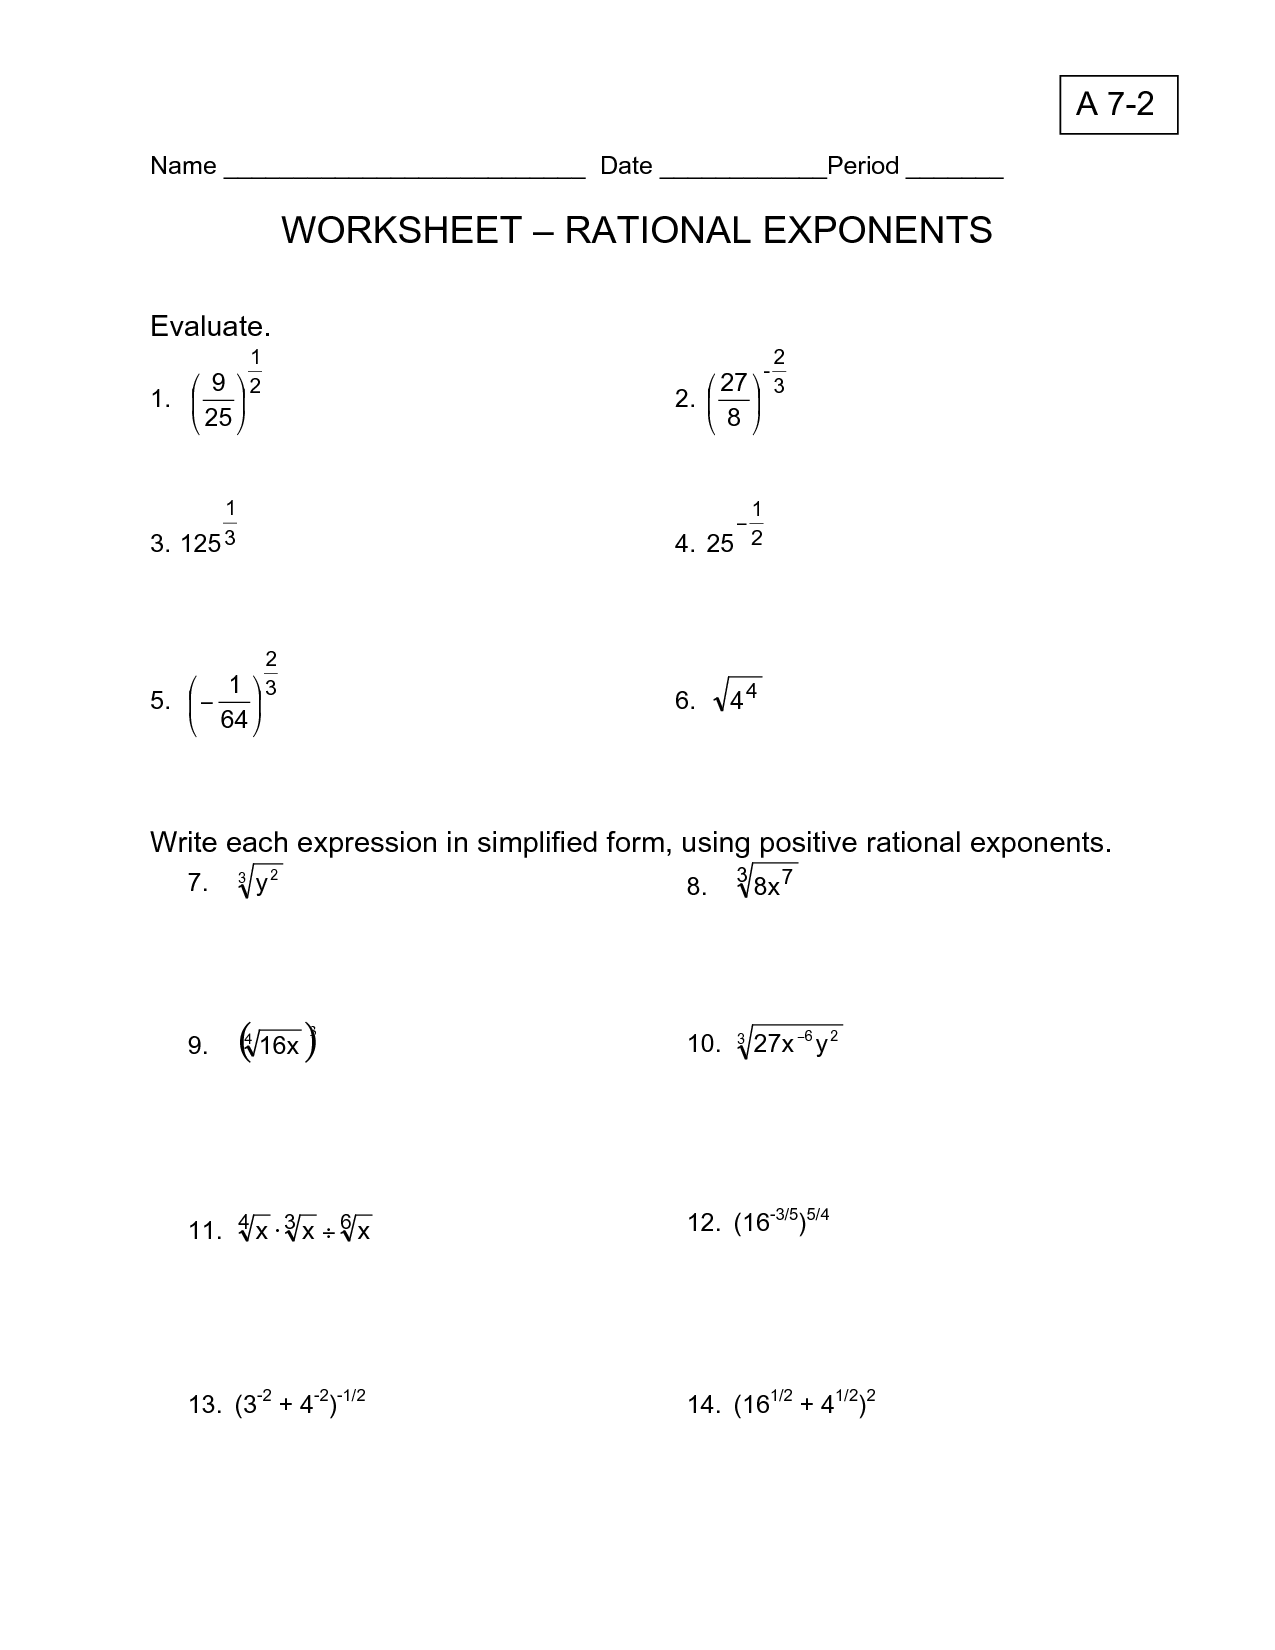 answers to exponents worksheet